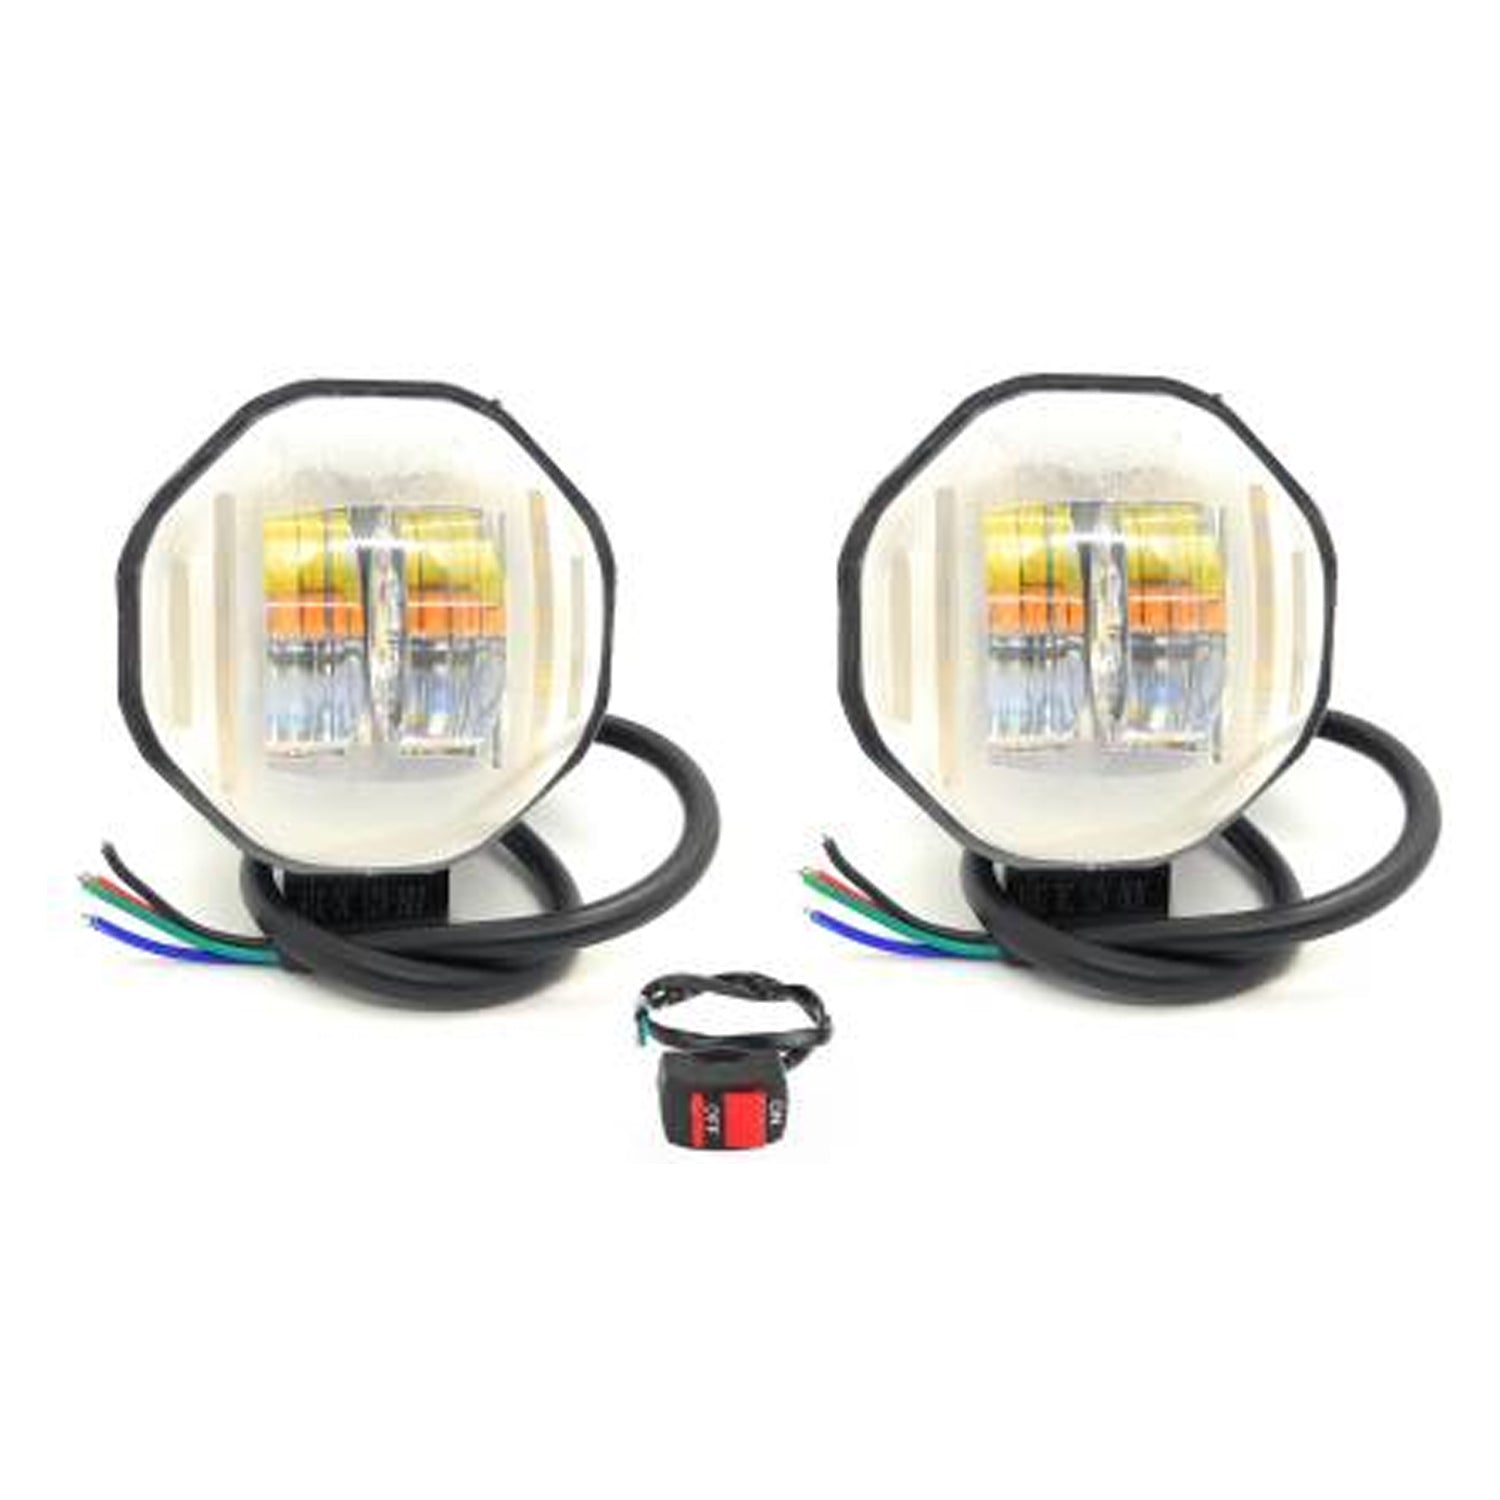 AutoPowerz Fog Lamp LED  (Universal For Bike, Universal For Car, Pack of 3)